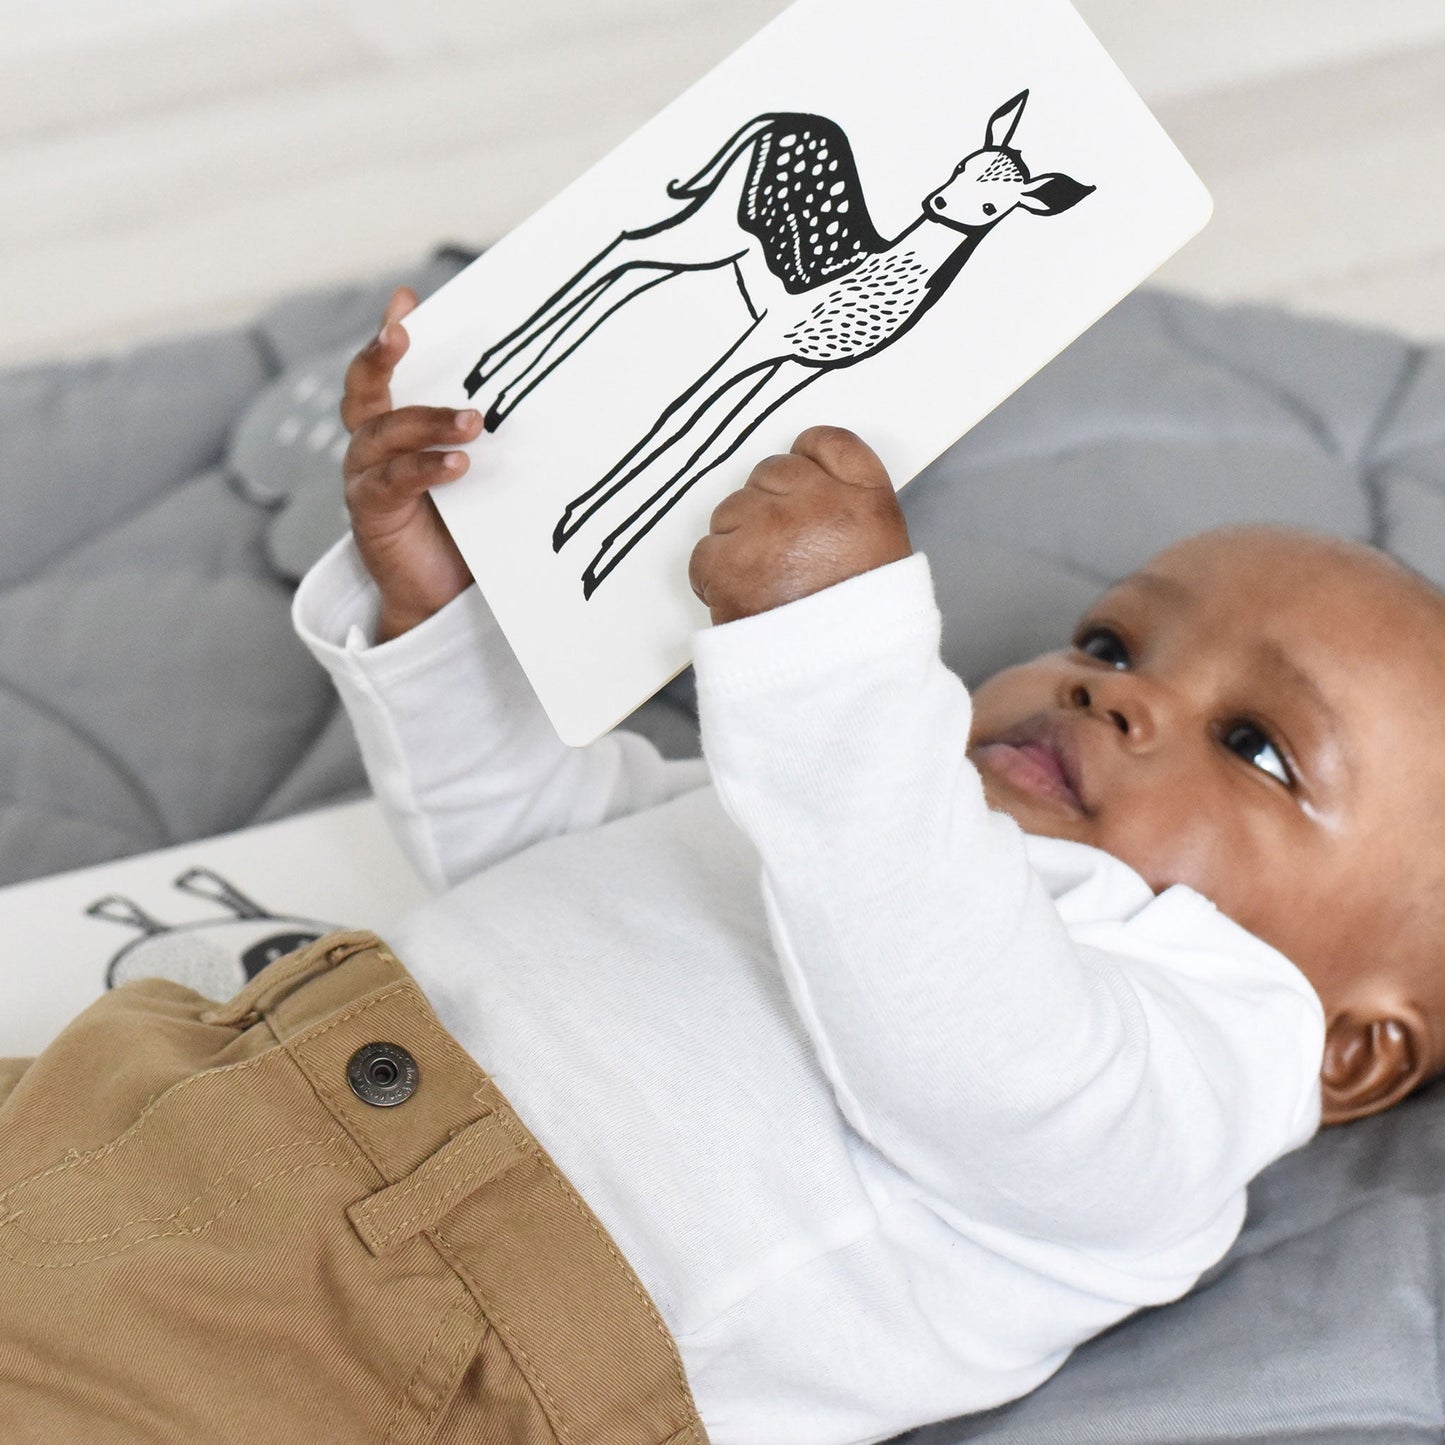 Art Cards for Baby- Black and White Collection